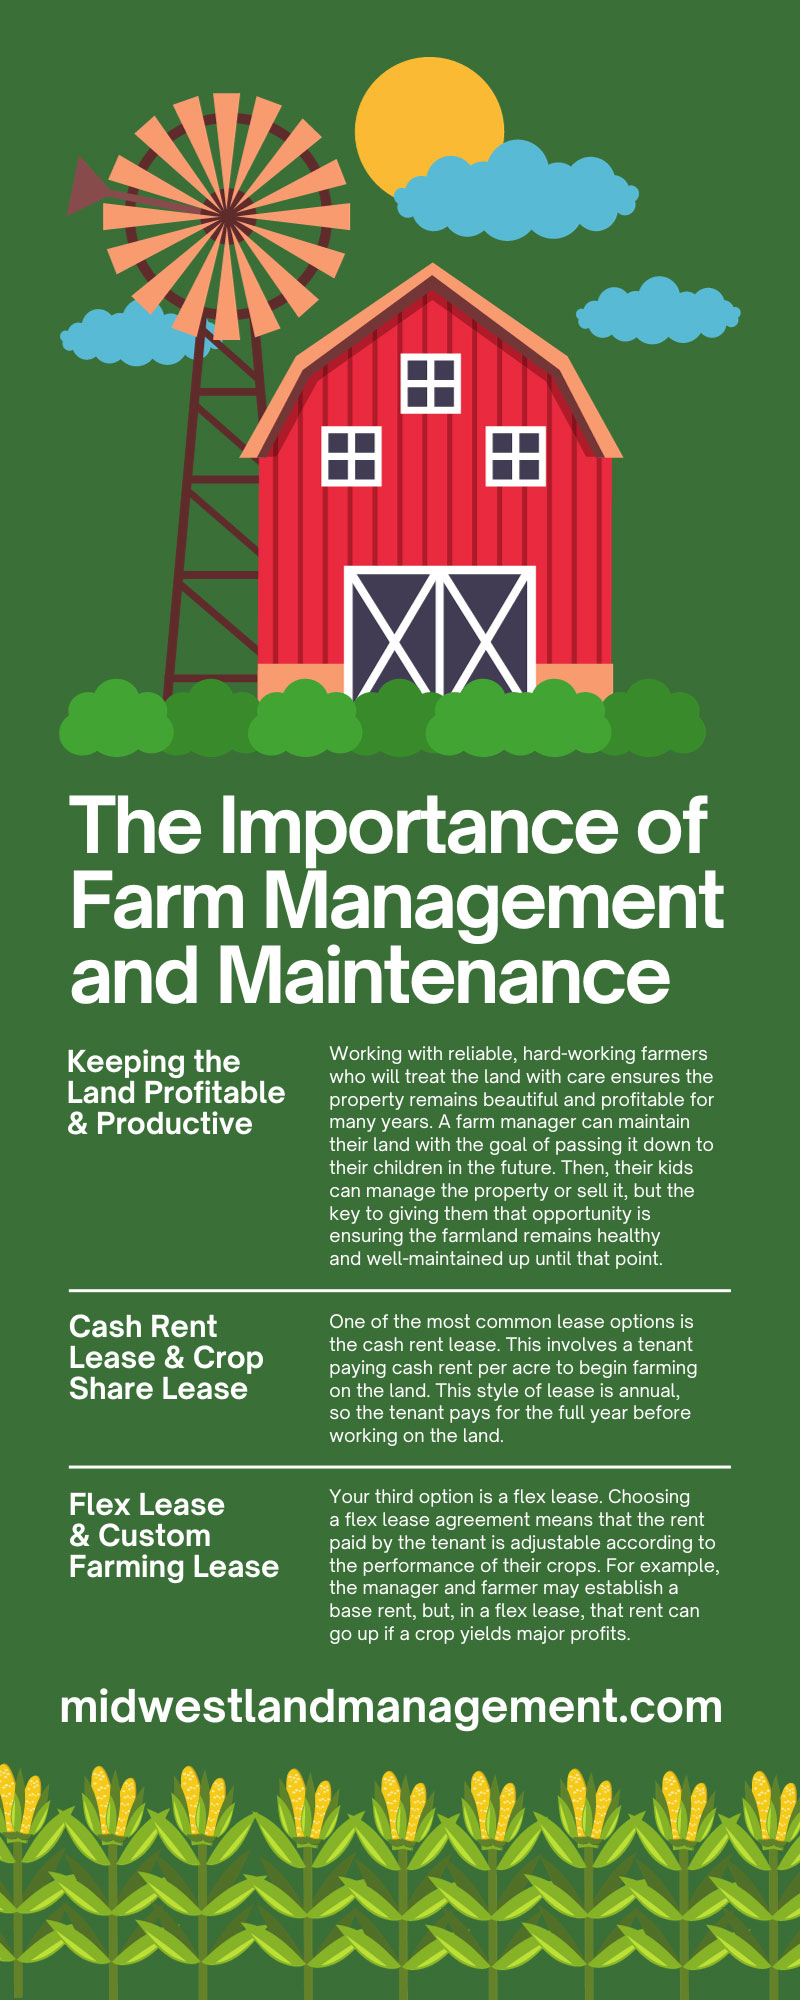 The Importance of Farm Management and Maintenance